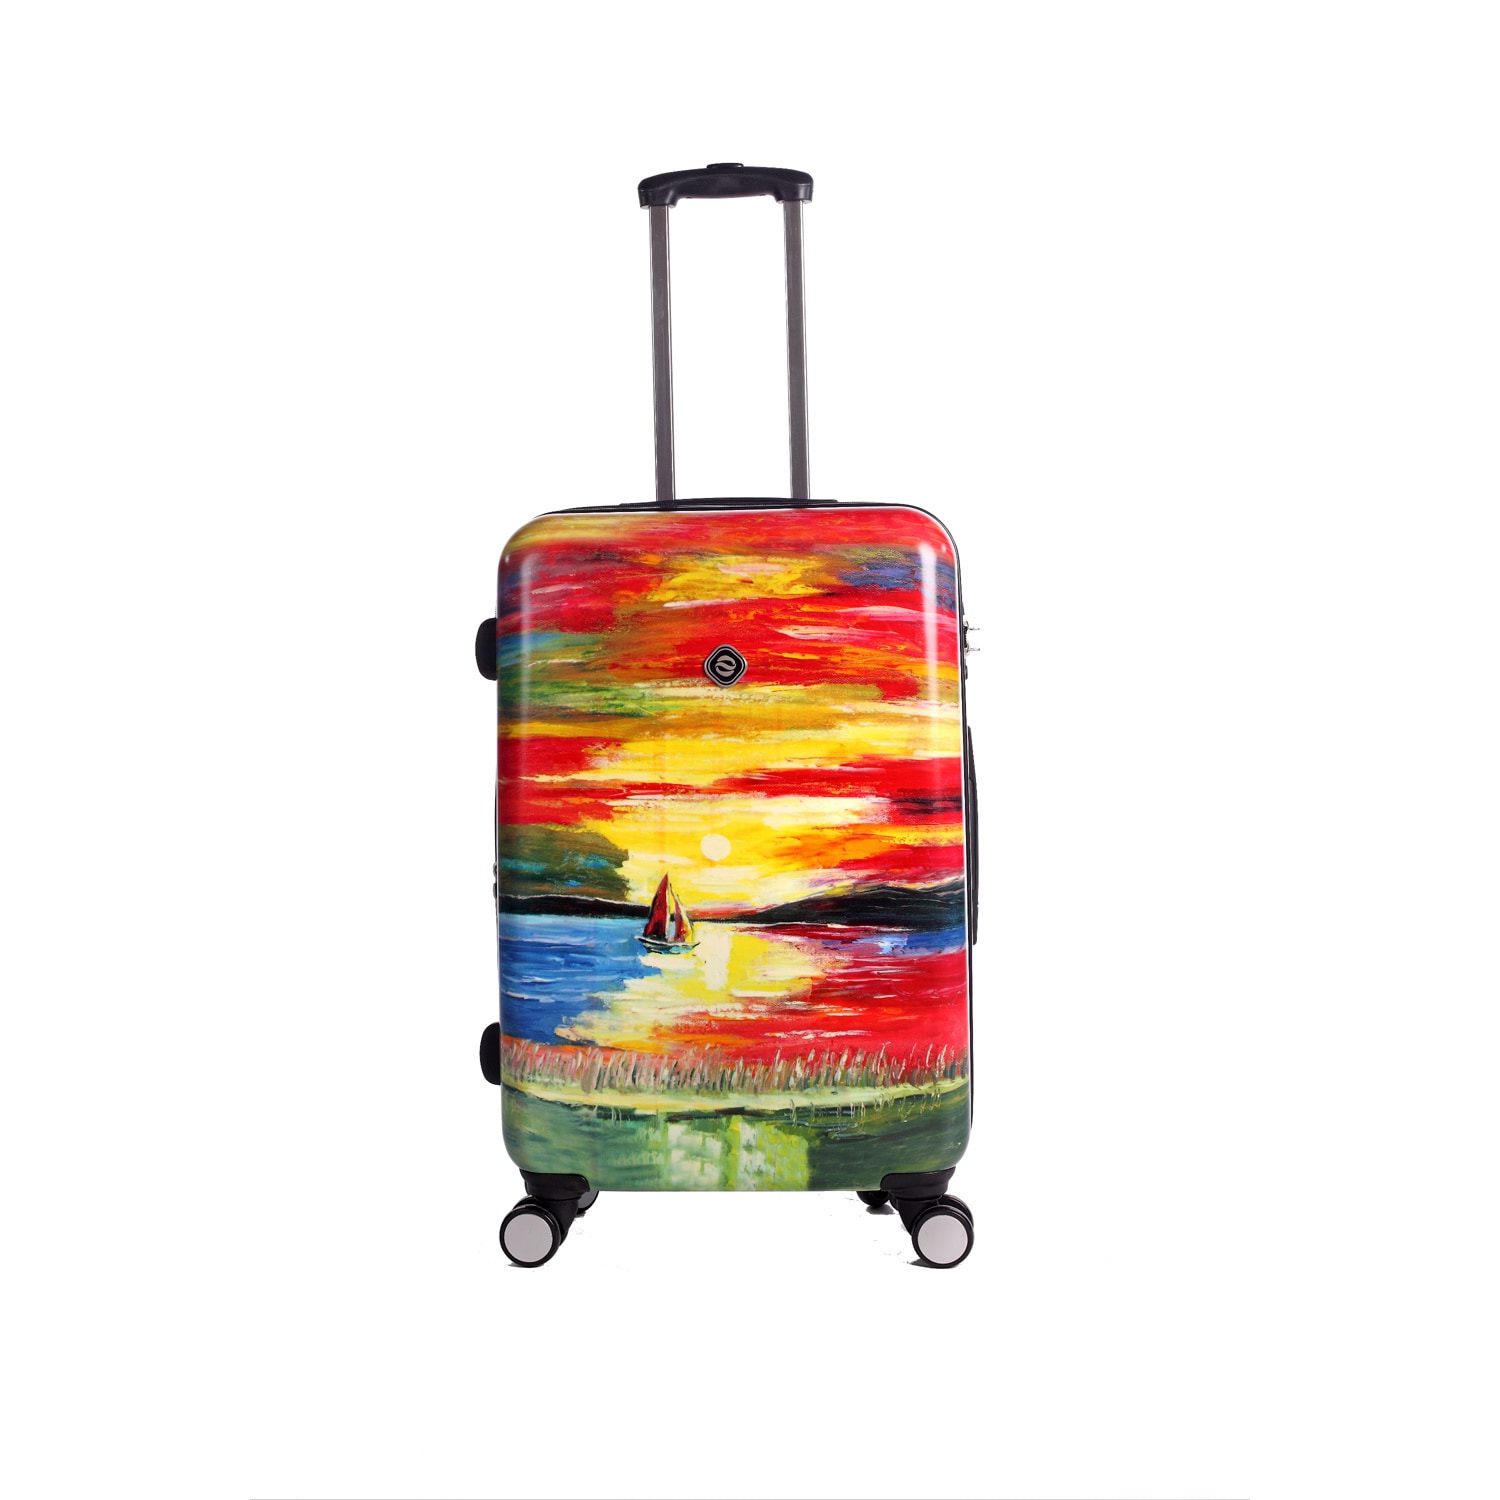 Neocover Sailing Through Sunsets 28 inch Hardside Spinner Upright Suitcase (MulticolorWeight 10.1 pounds Pockets One (1) large pocket, two (2) small pockets Carrying handle Metal handle with soft rubber grip Impact locking push button aluminum telescop